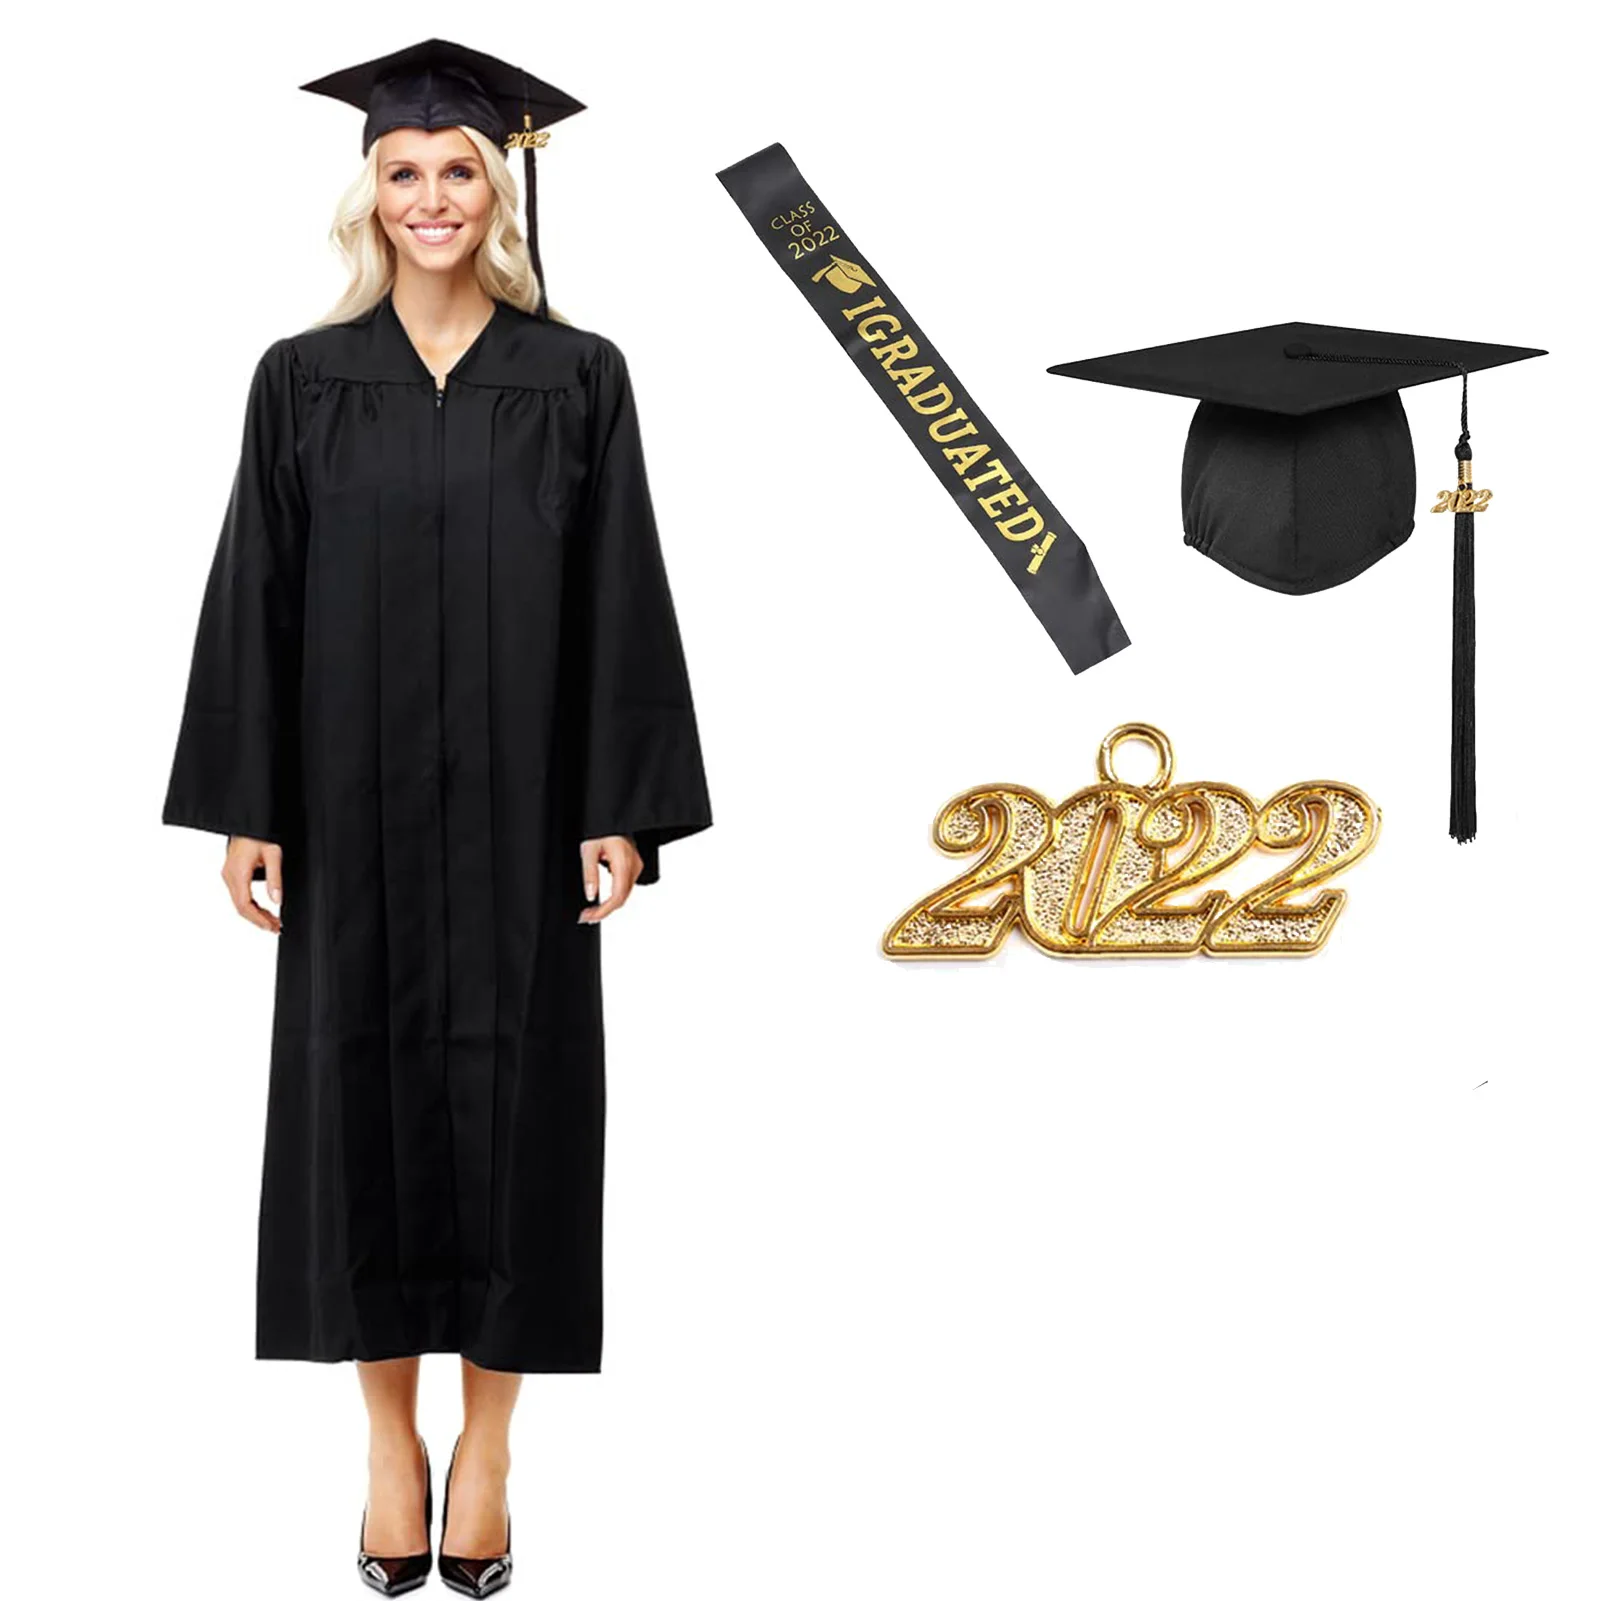 2022 Graduation Gown And Cap With Tassel Unisex Academic Cap And Gown 2022 High School University Graduation Ceremony